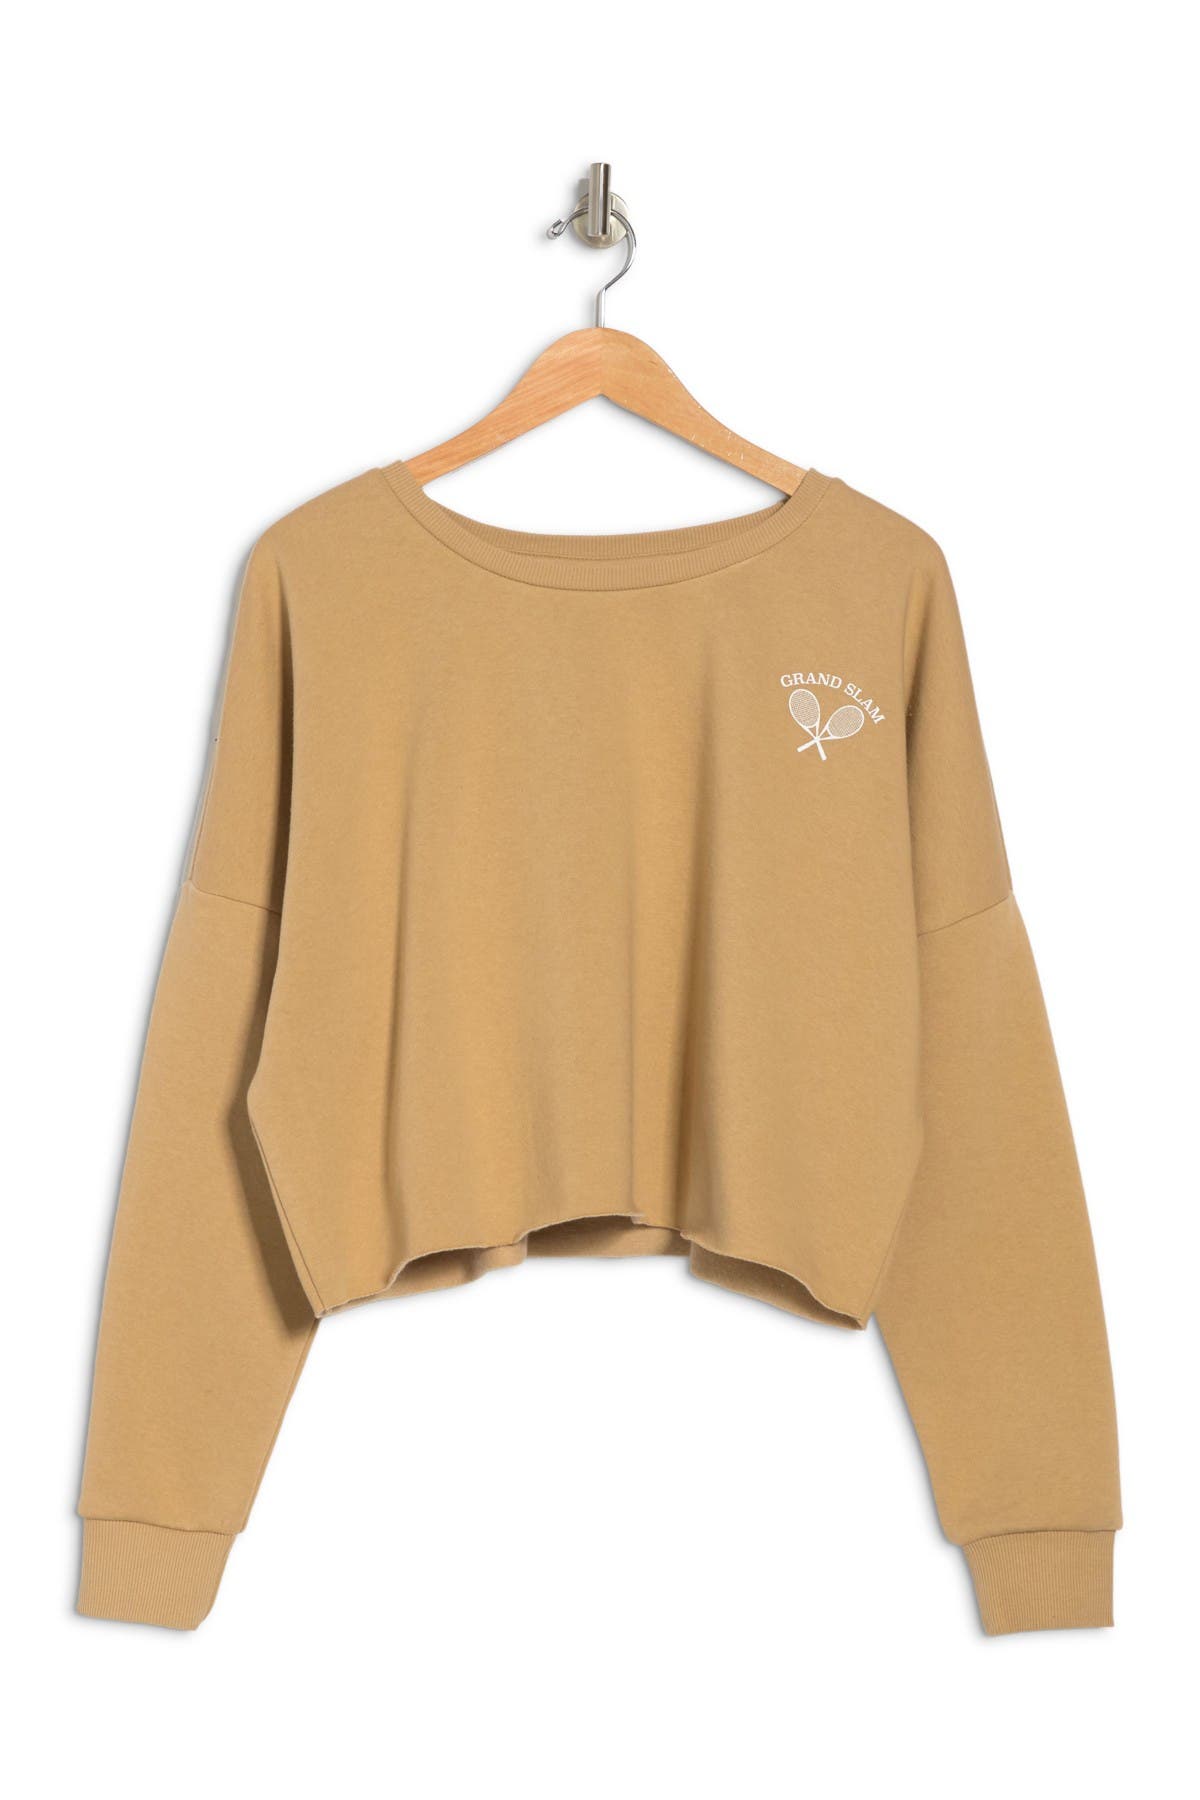 Abound State Print Cropped Fleece Pullover In Beige Nougat Grand Slam